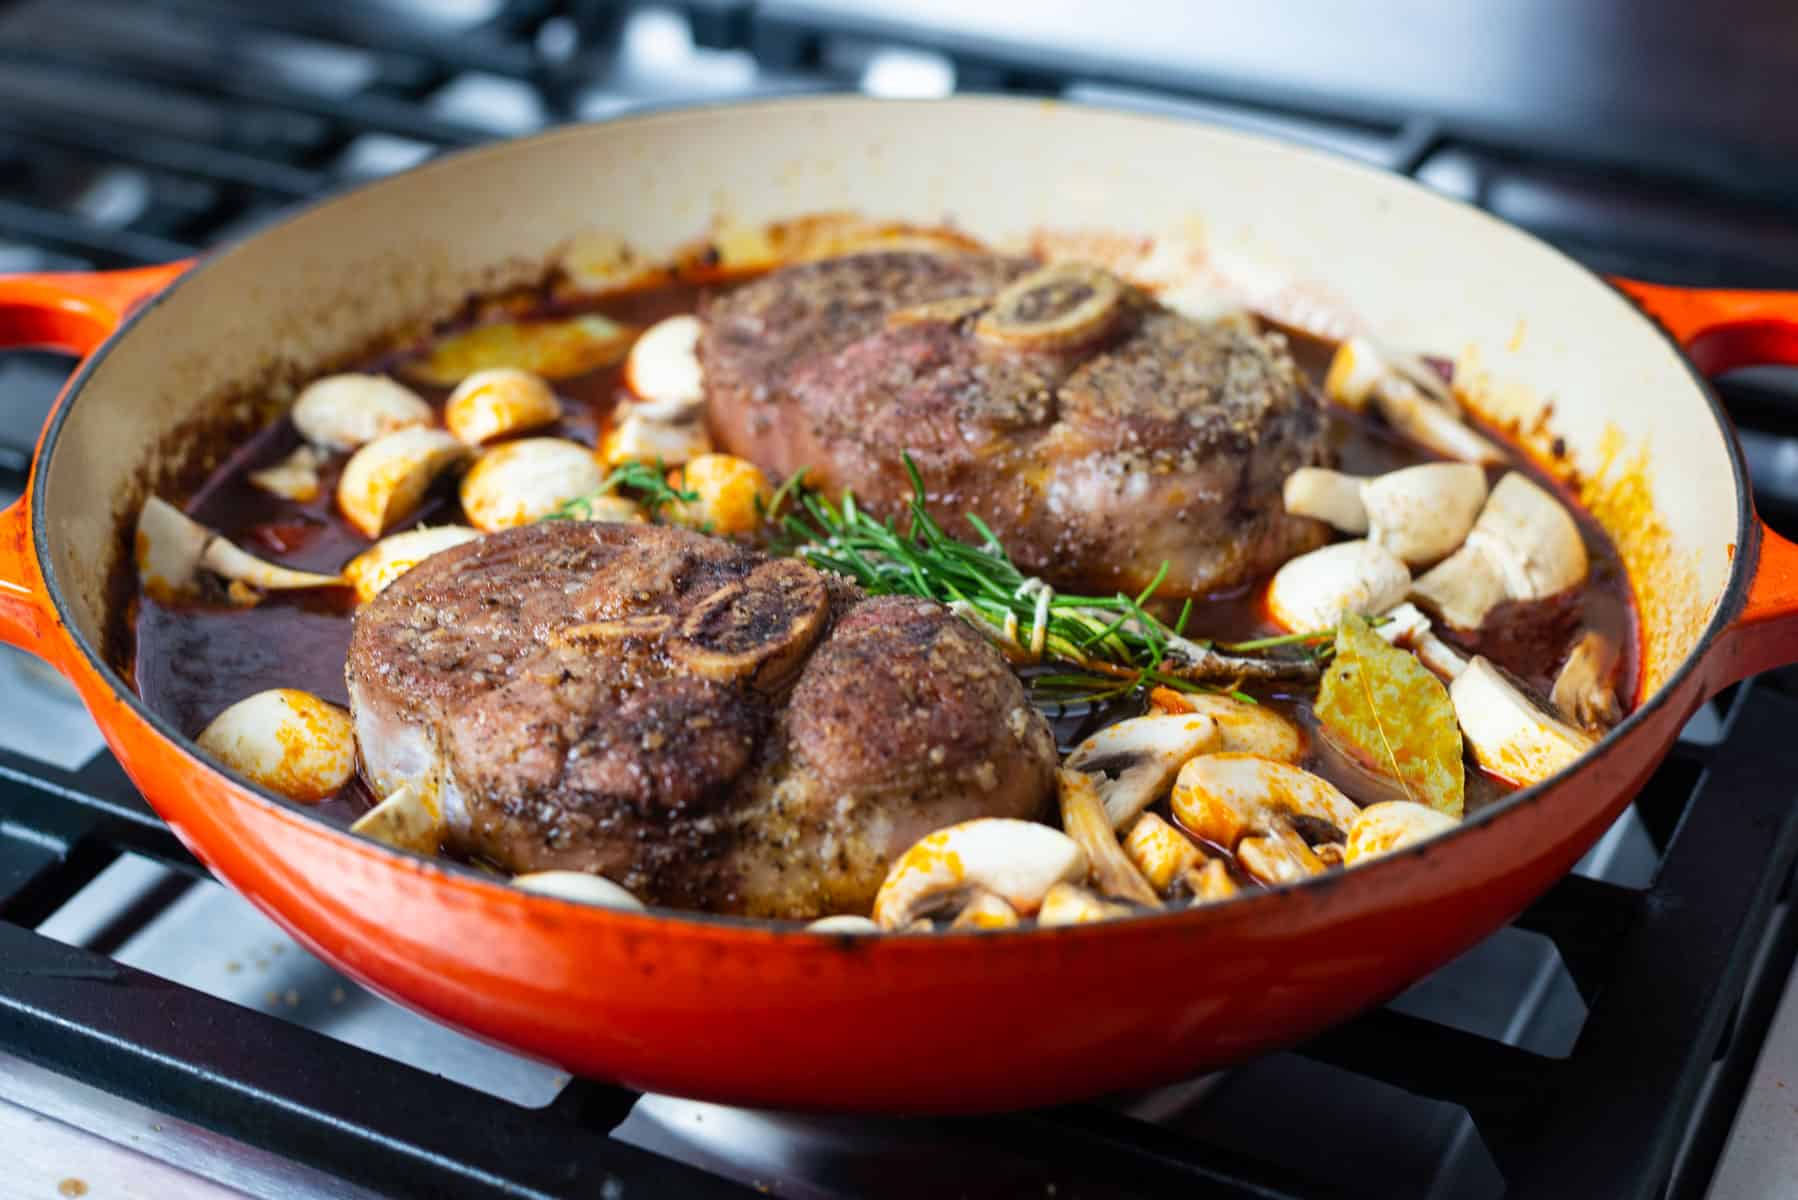 Add fresh herbs and mushrooms to the veal osso buco.